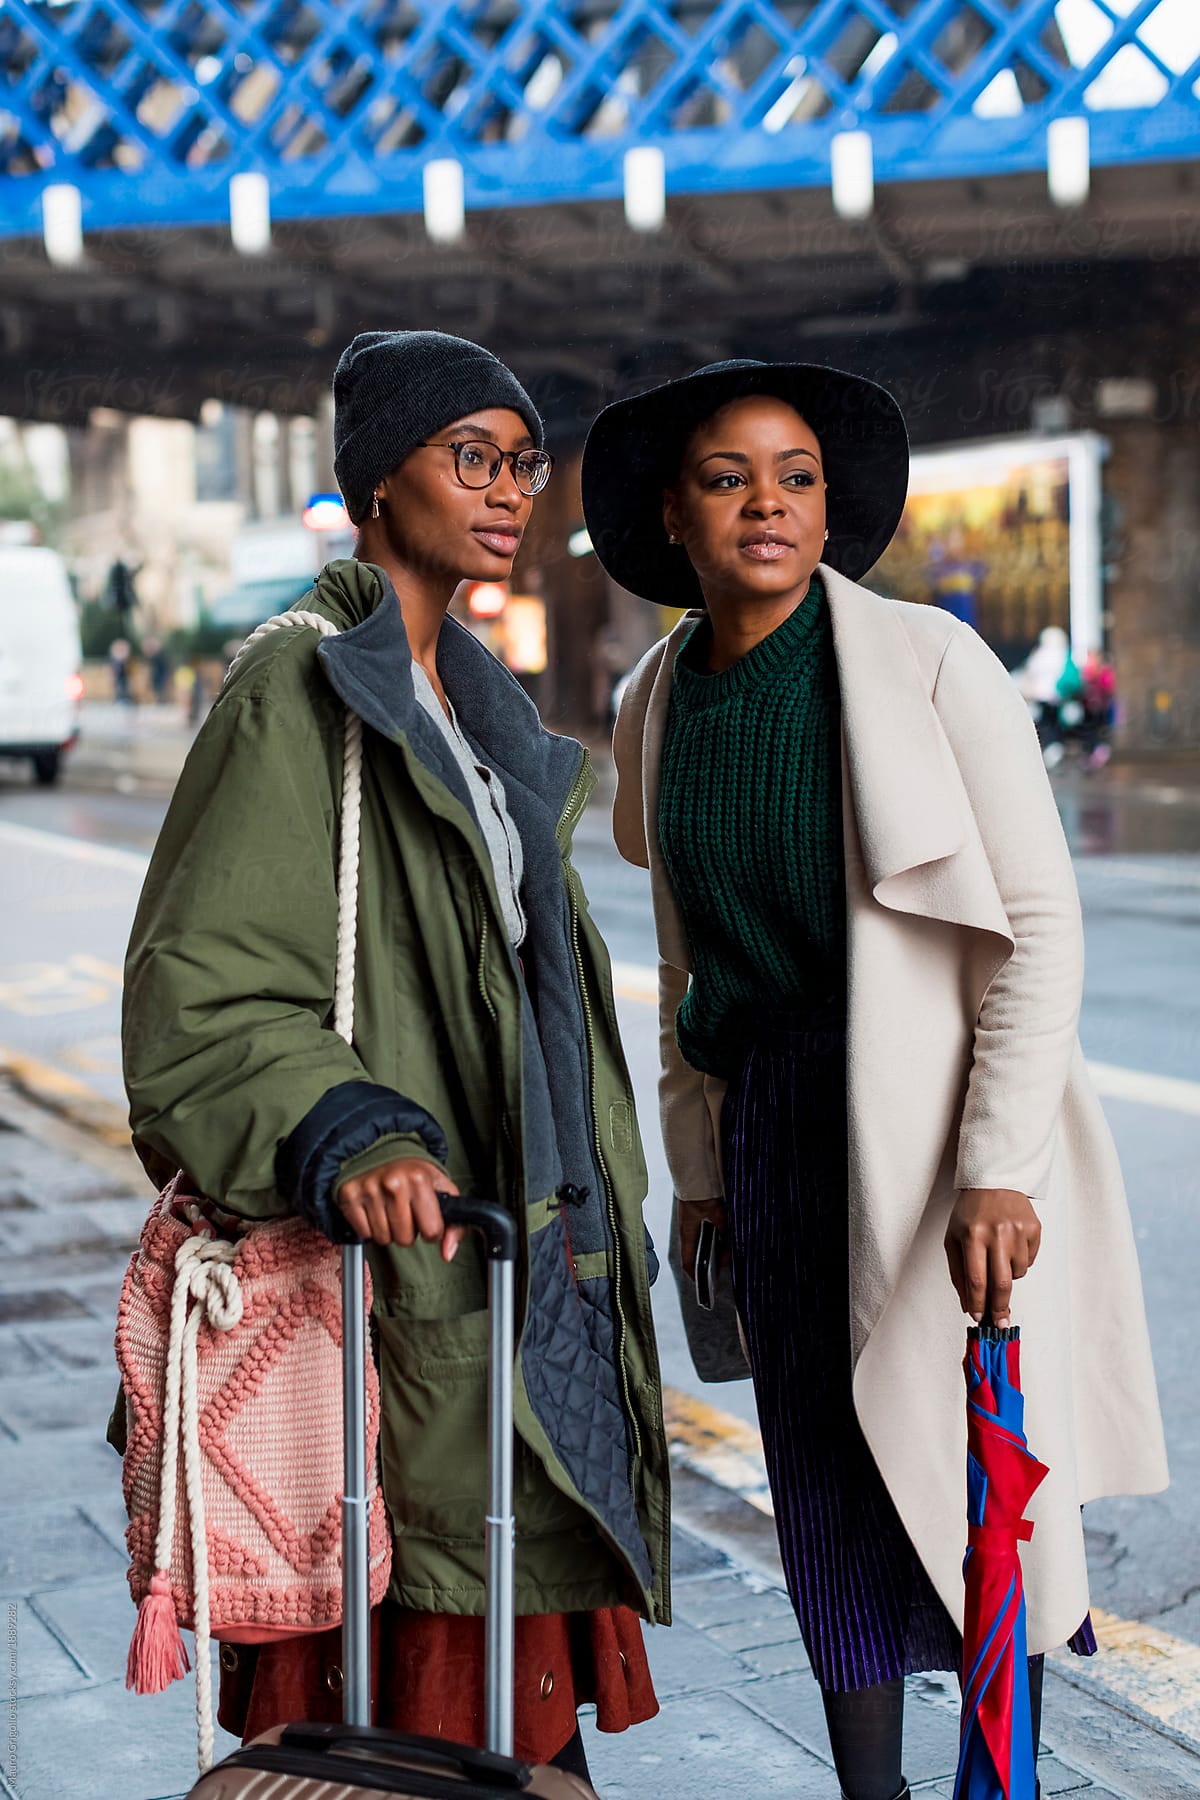 Fashionable Black women waiting for the bus